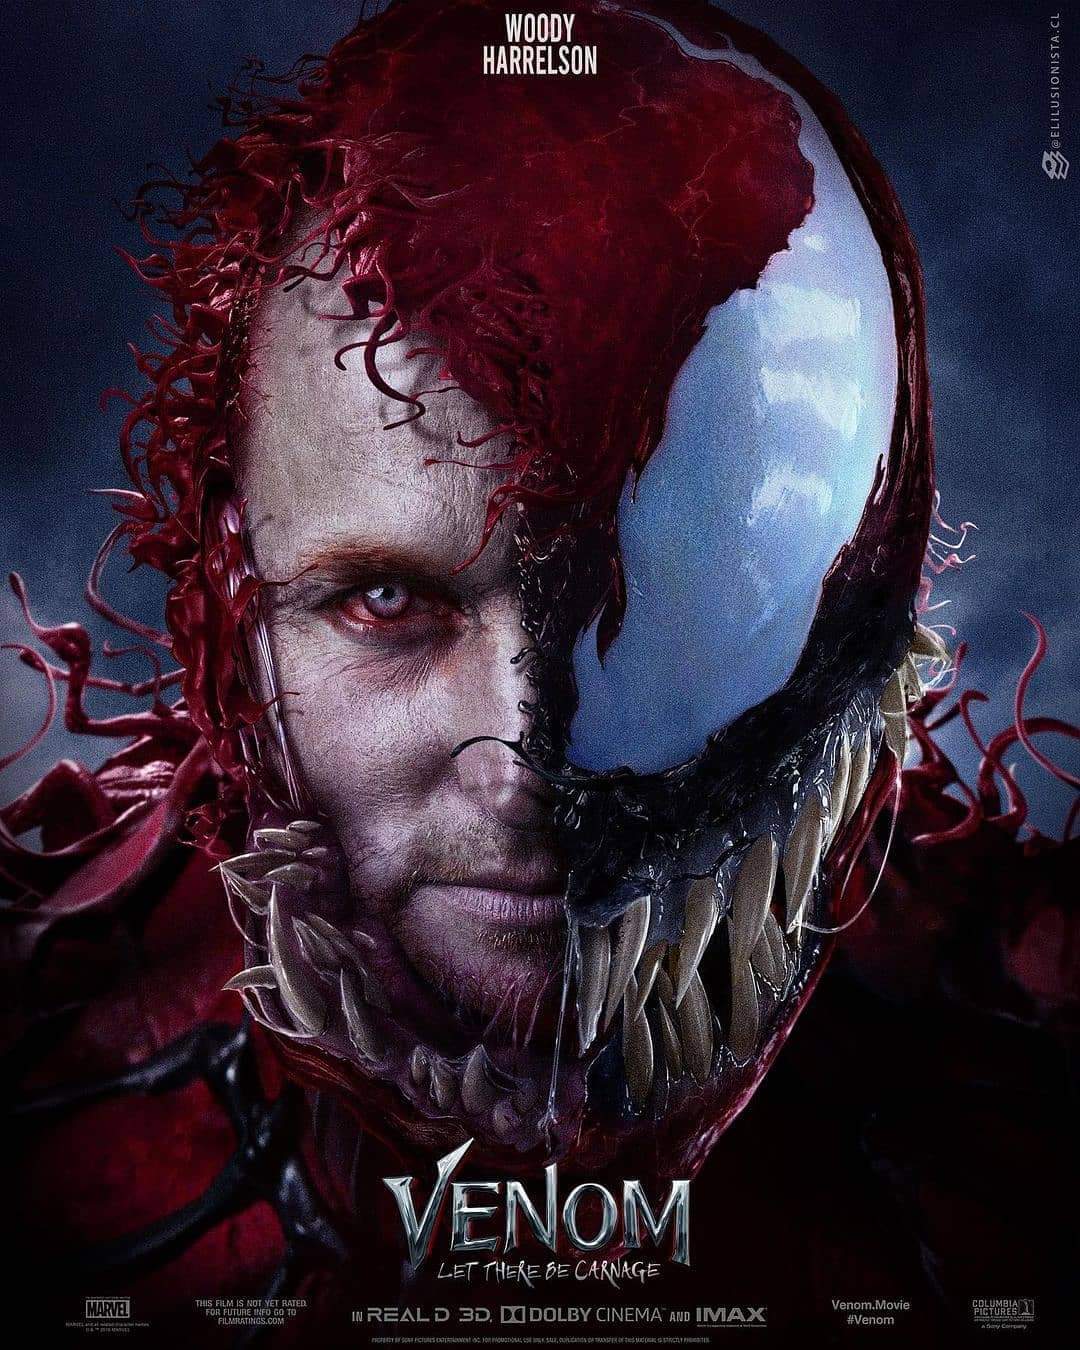 Venom 2: Fan made Woody Harrelson / Carnage Poster looks good enough to be official!